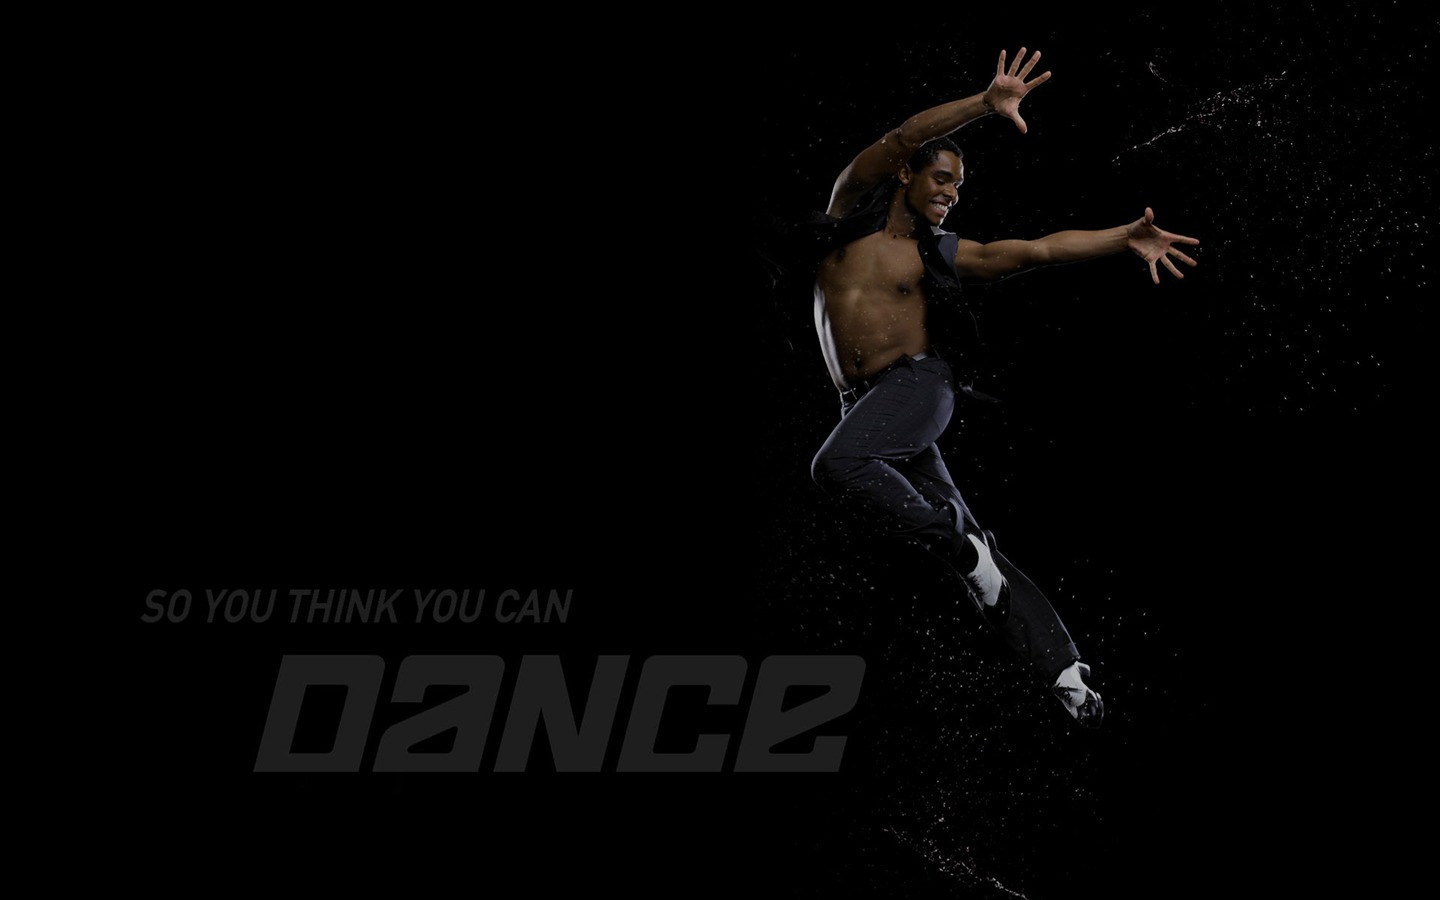 So You Think You Can Dance wallpaper (2) #20 - 1440x900